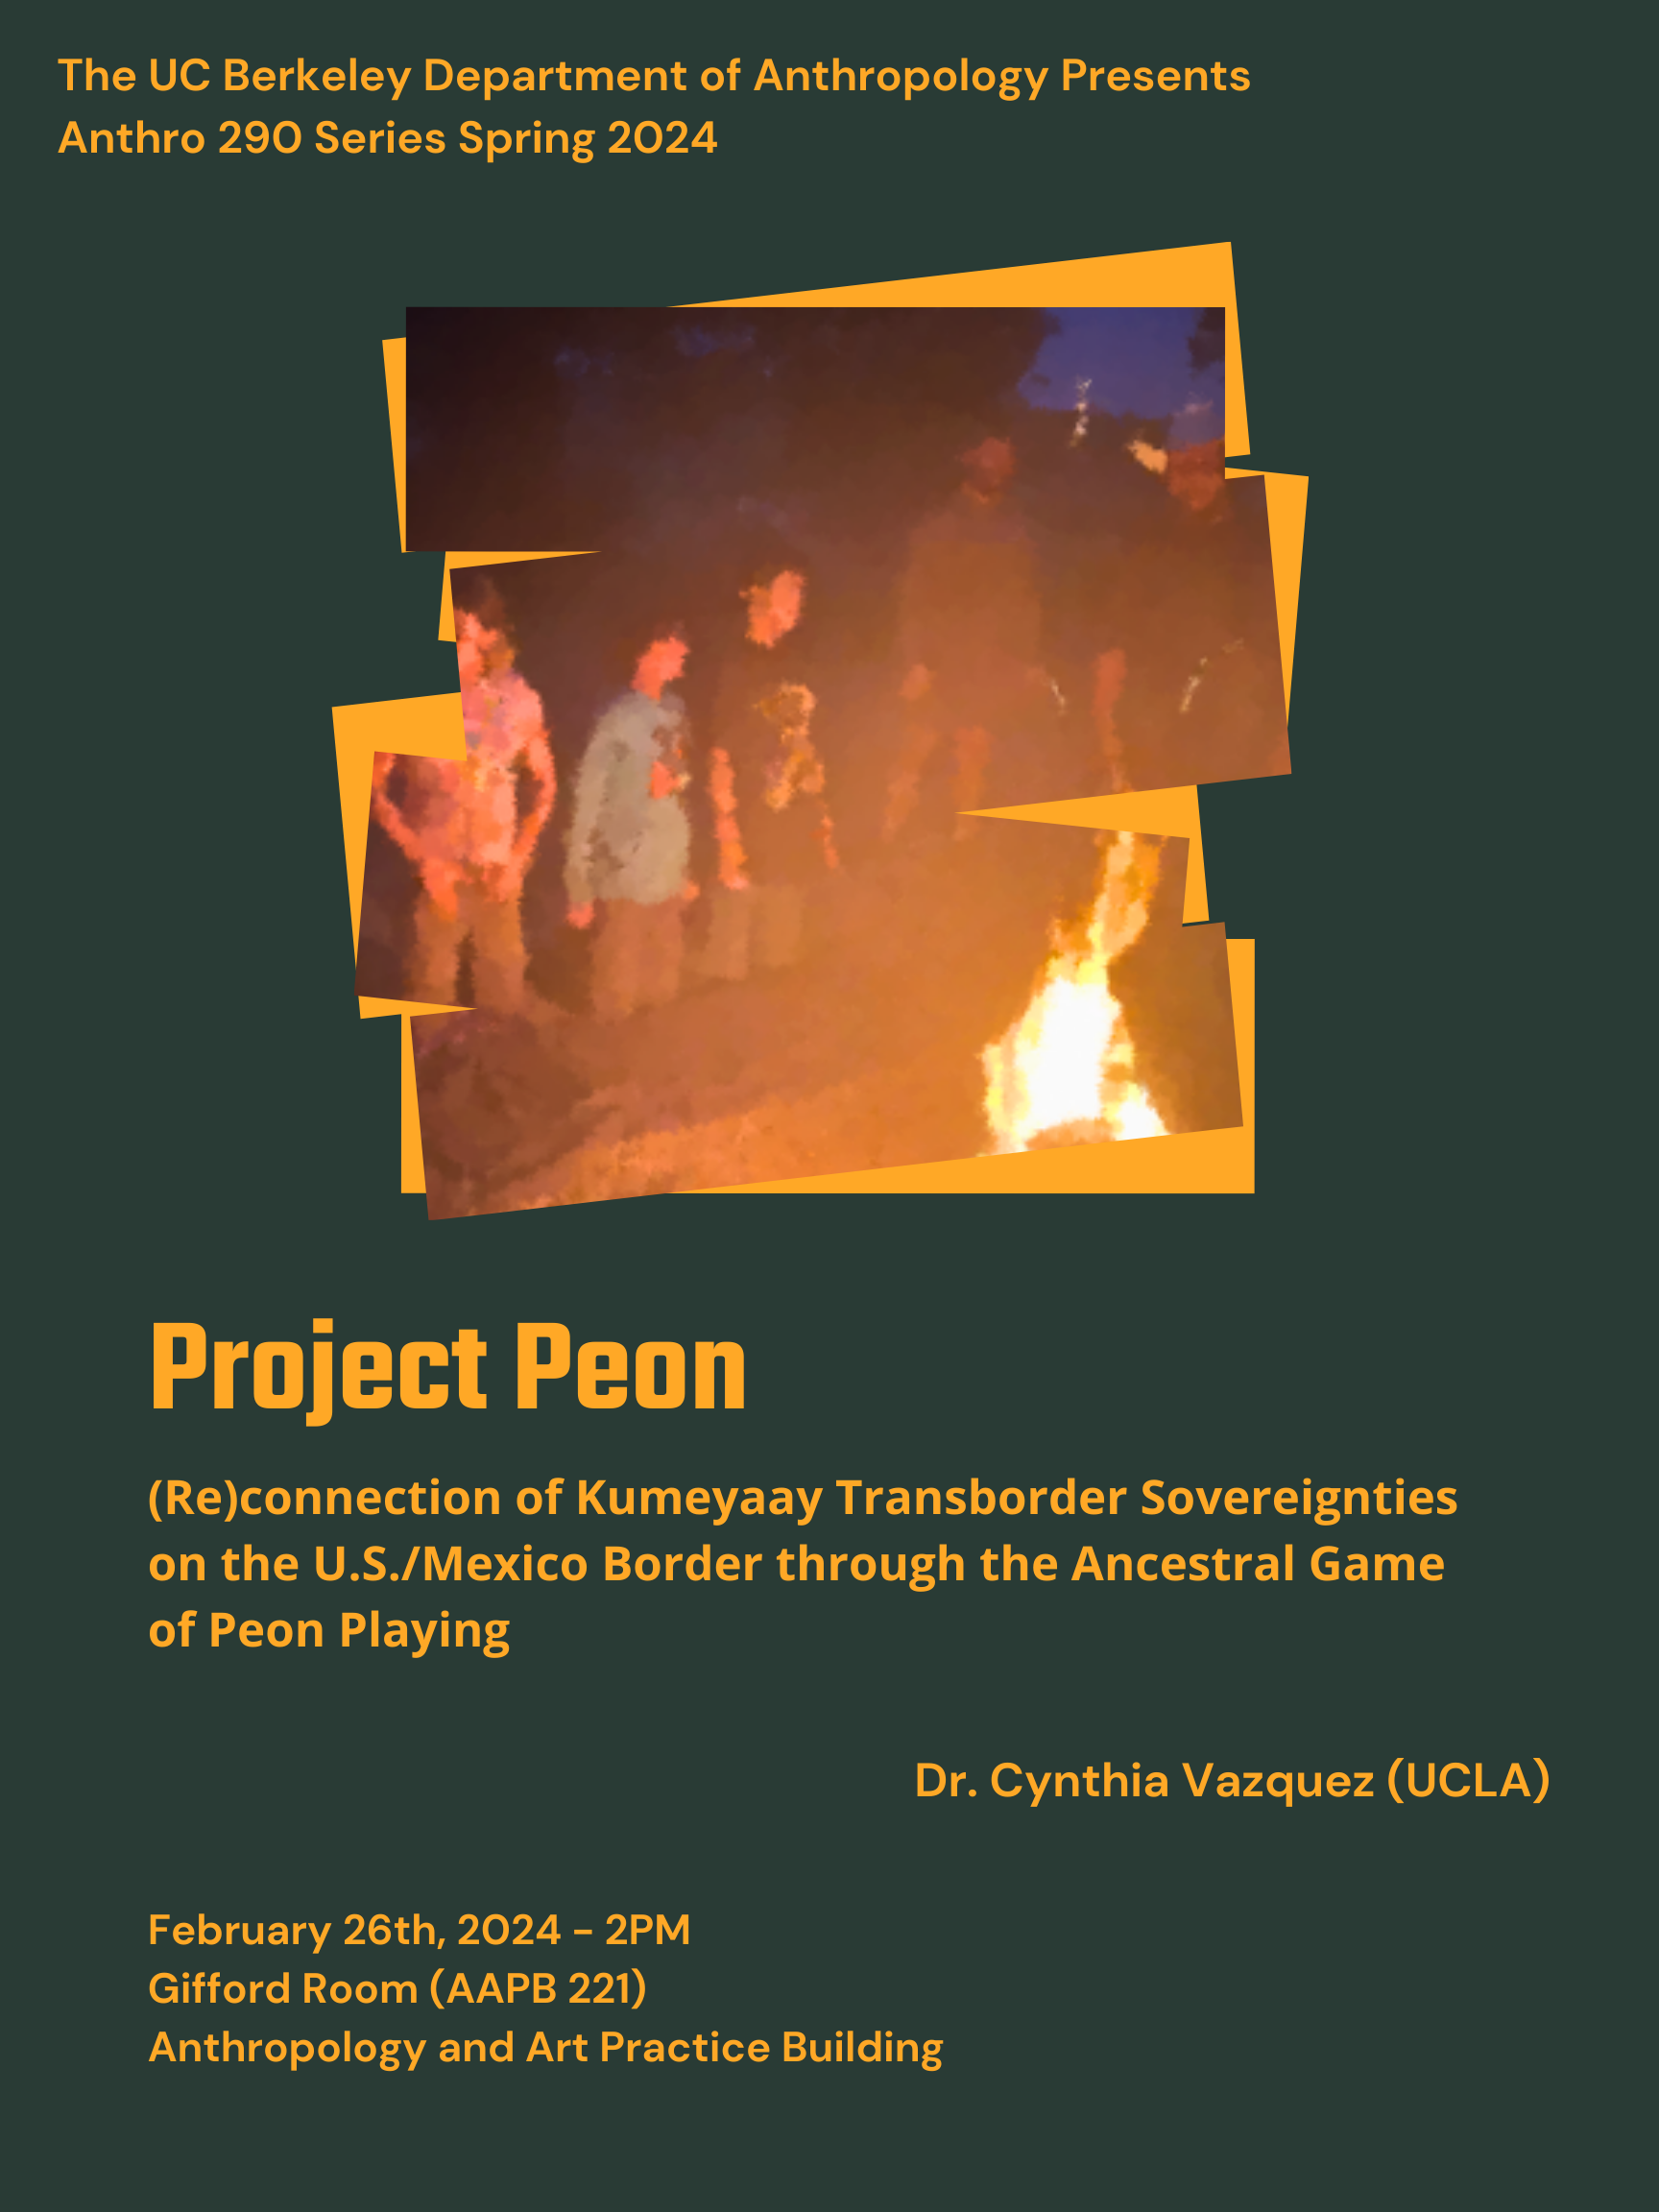 (Re)connection of Kumeyaay Transborder Sovereignties on the U.S./Mexico Border through the Ancestral Game of Peon Playing; February 26th Monday 2 pm in the Gifford Room